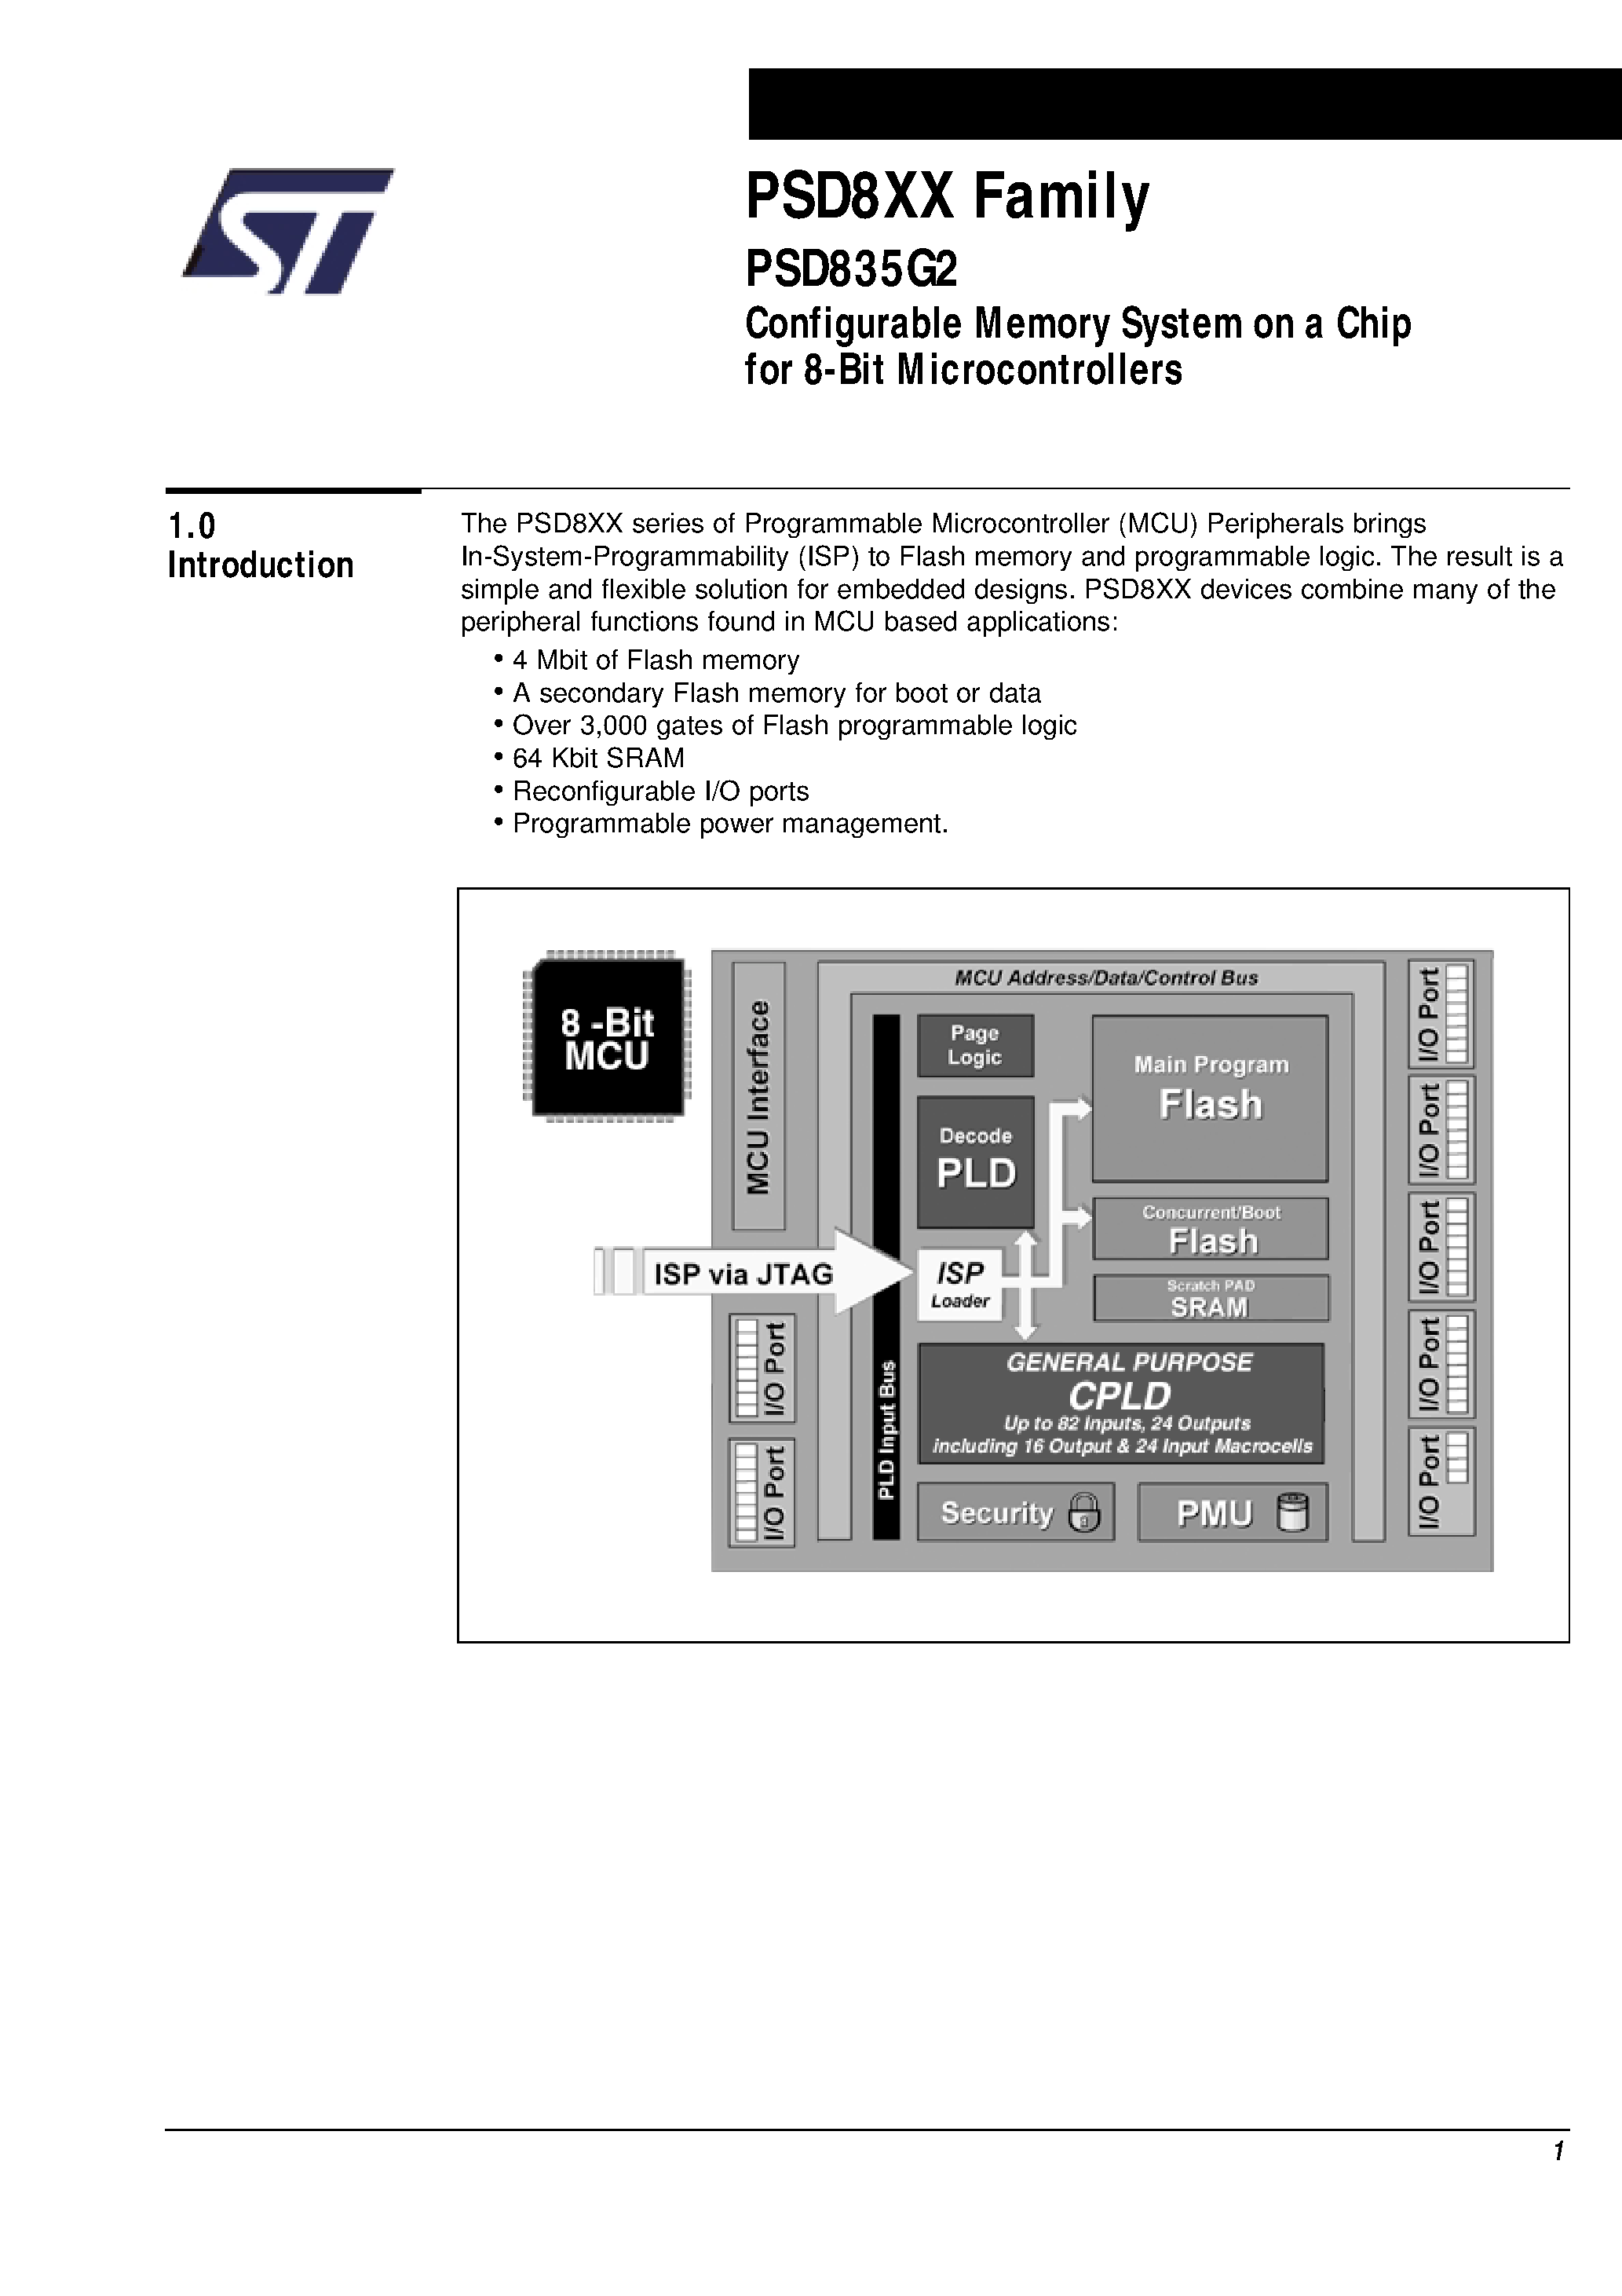 Datasheet PSD835F1-A-70J - Configurable Memory System on a Chip for 8-Bit Microcontrollers page 2